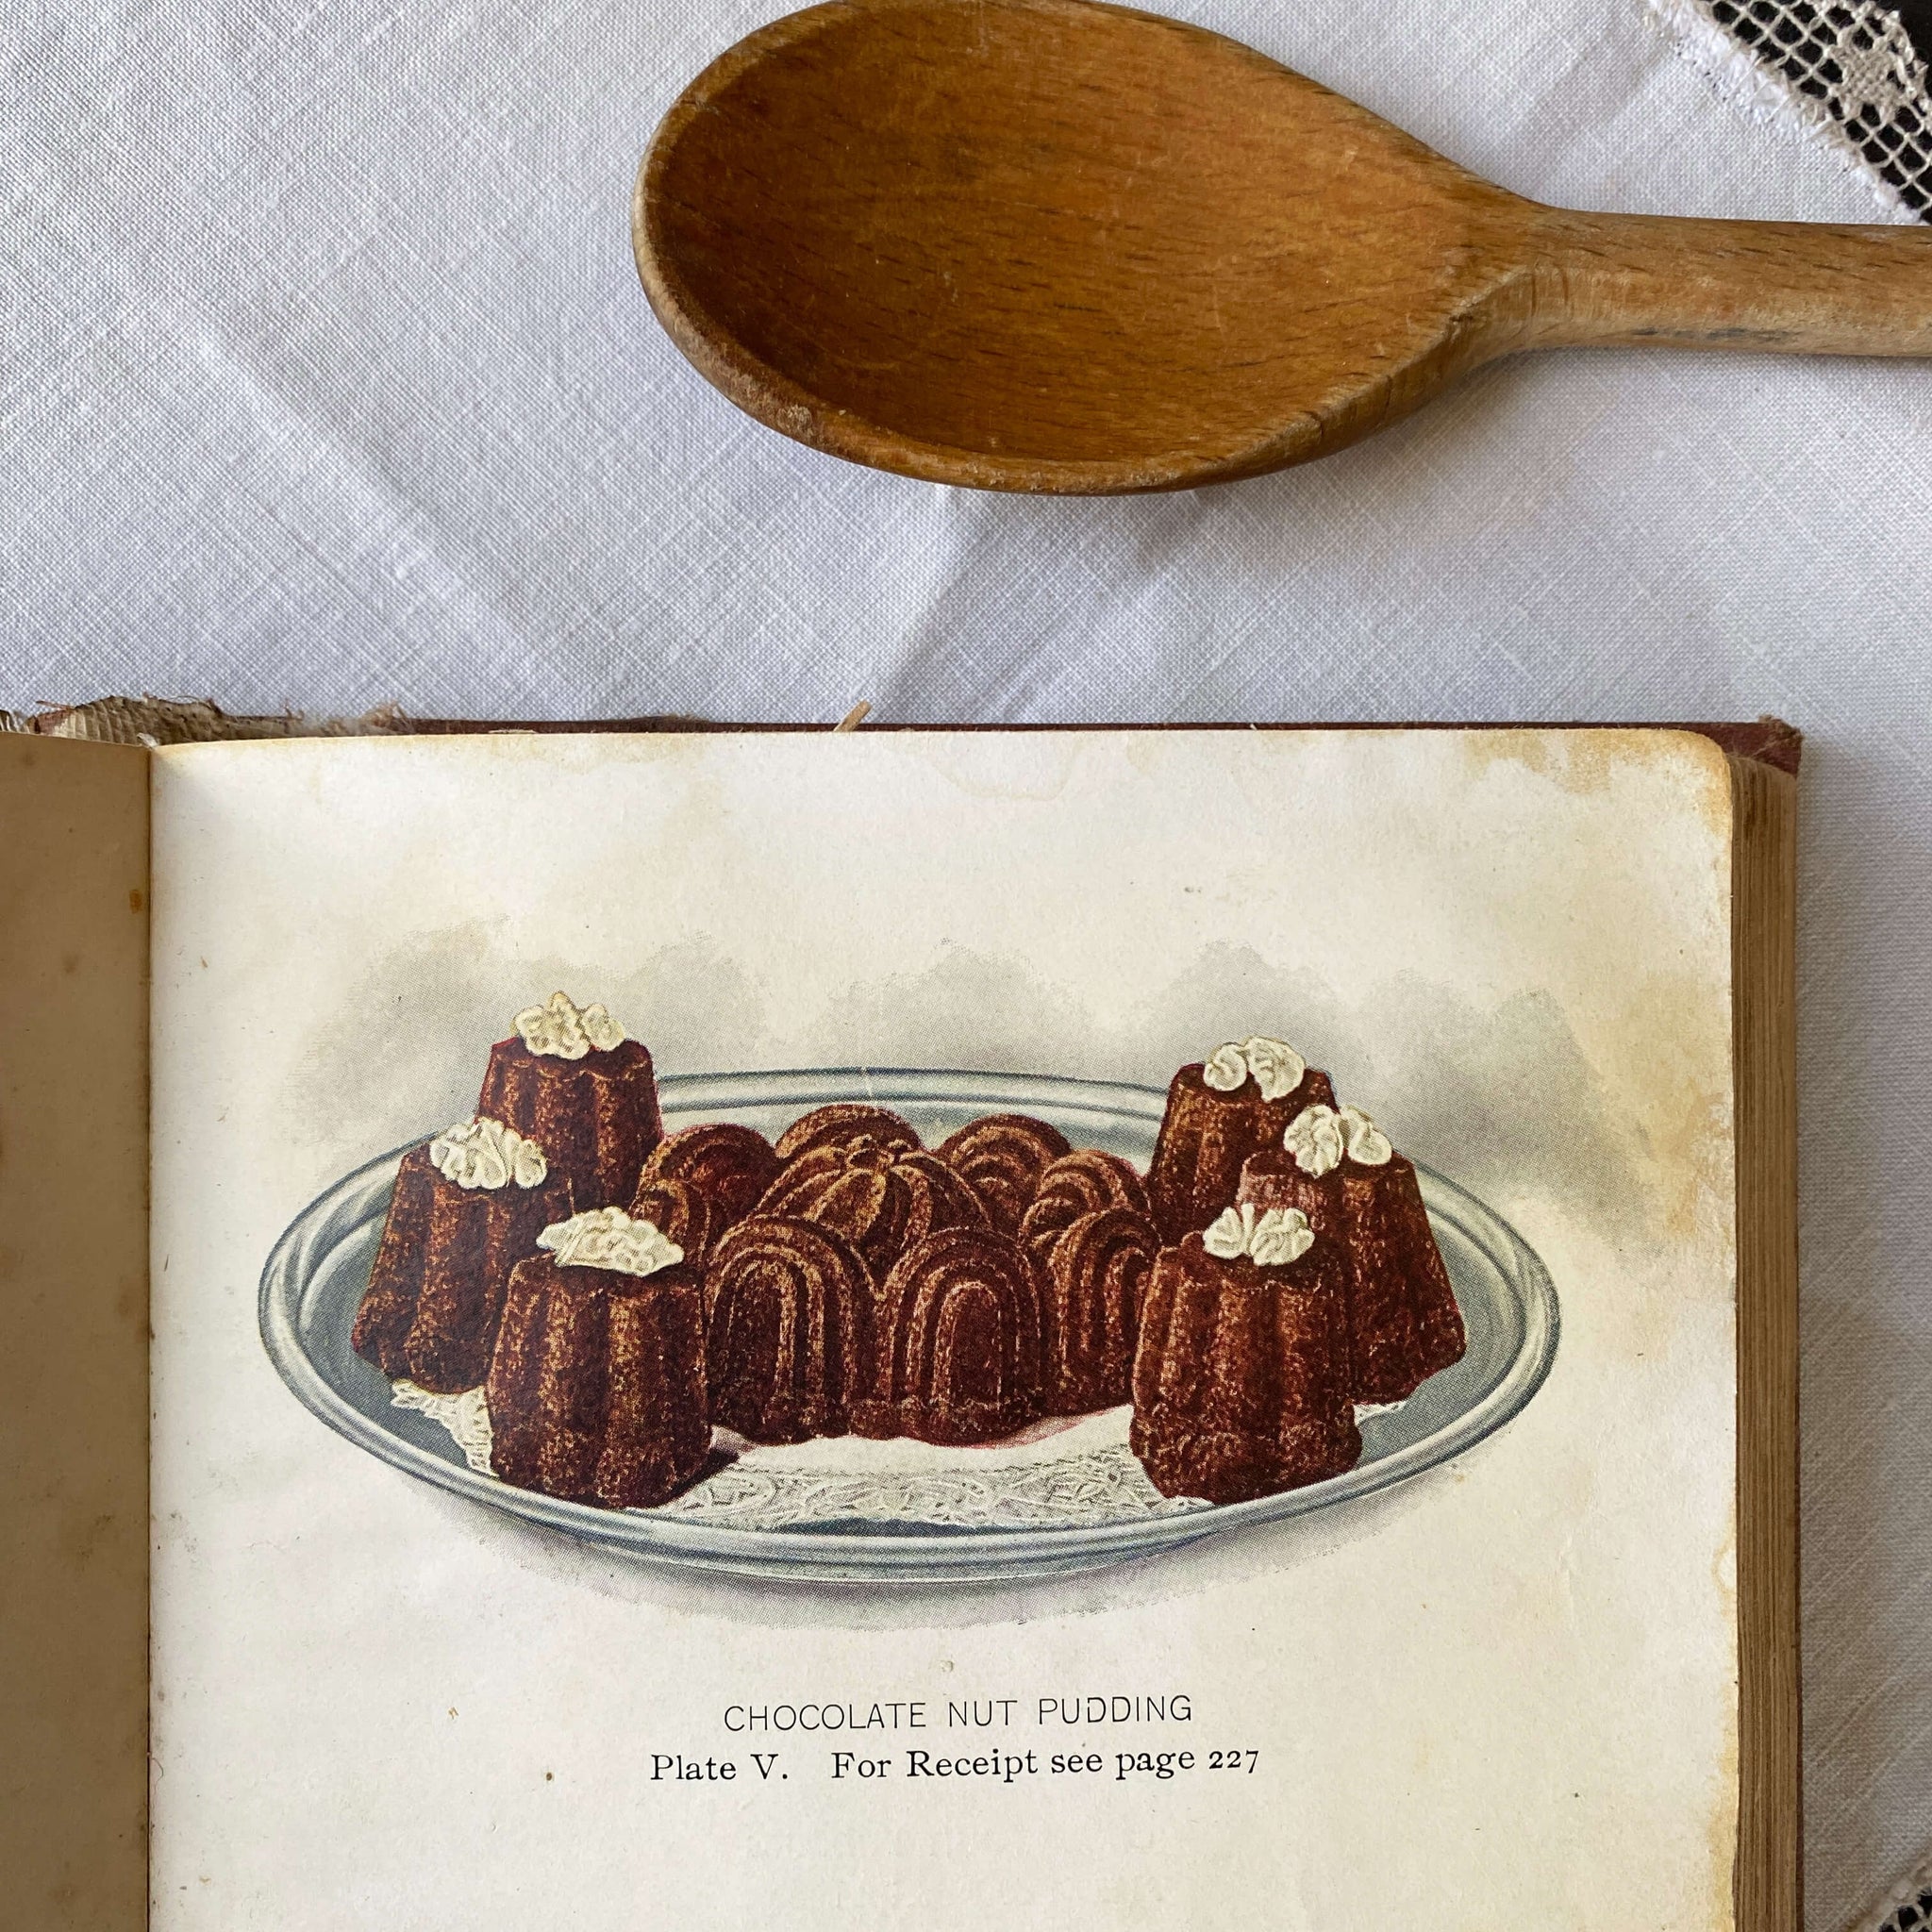 Antique Early 20th-Century Cookbook- Lowney's Cook Book circa 1912 - Maria Willett Howard